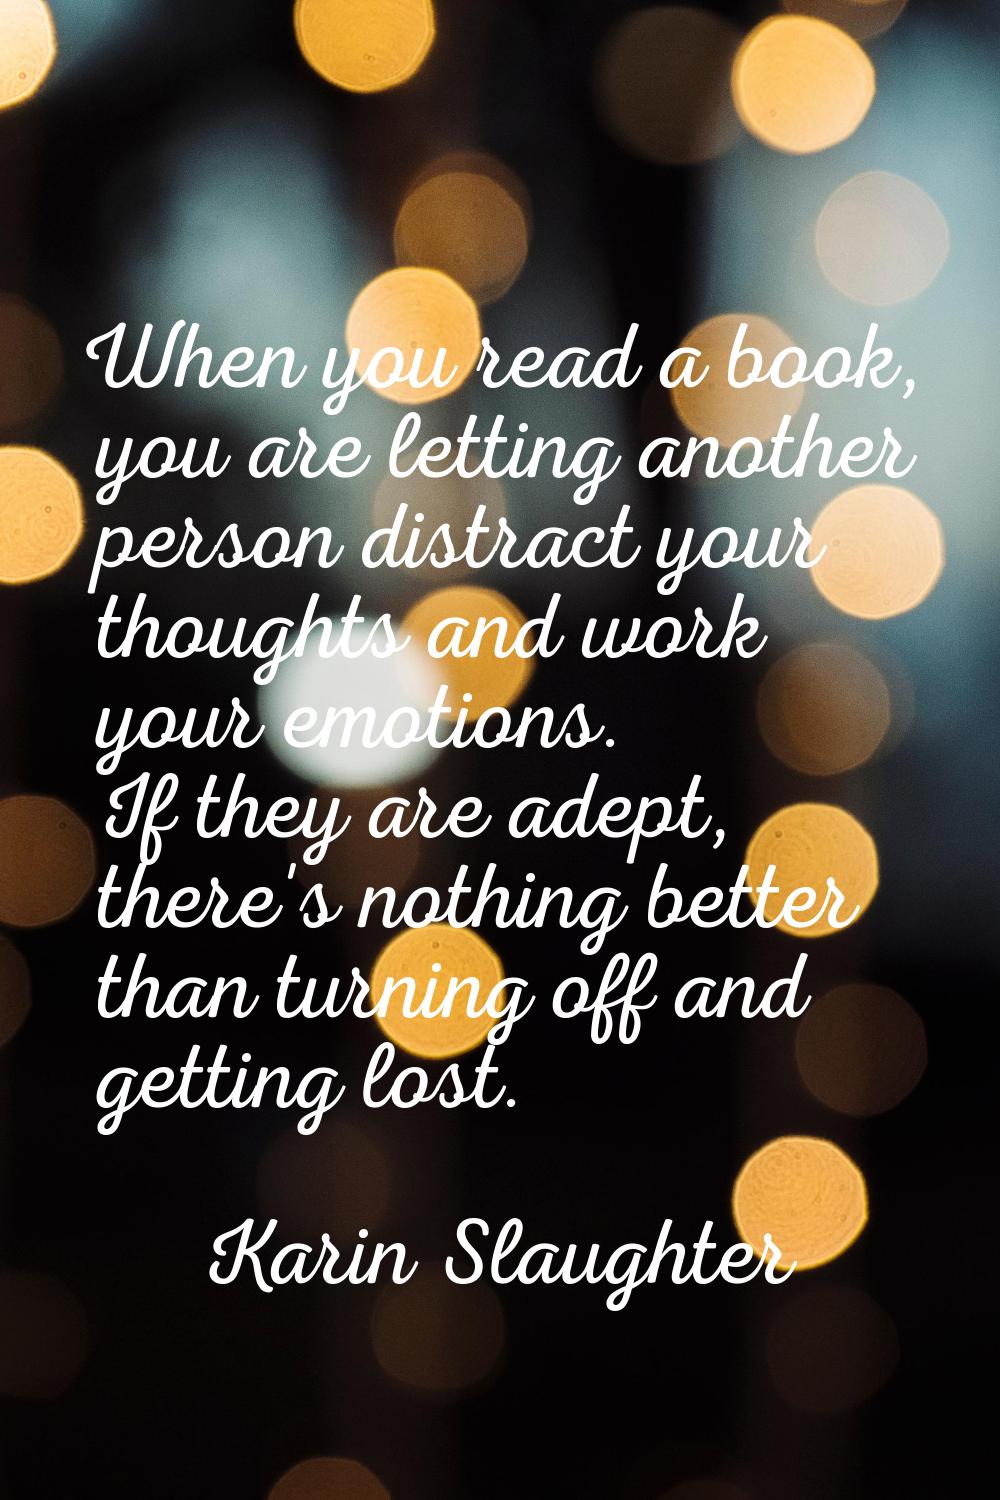 When you read a book, you are letting another person distract your thoughts and work your emotions.